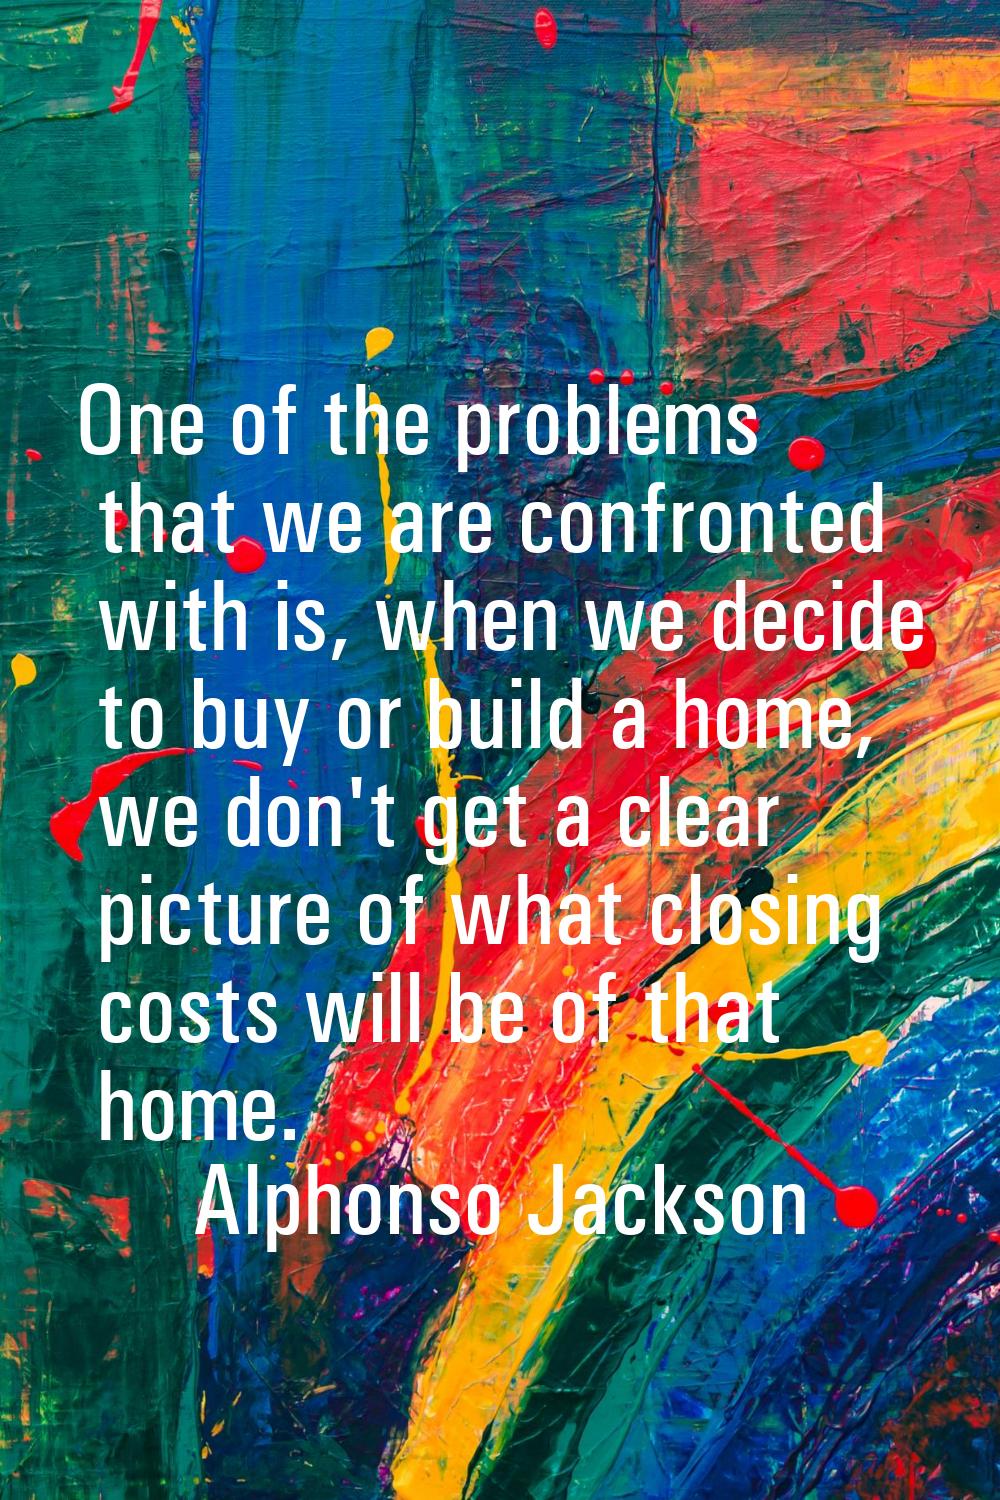 One of the problems that we are confronted with is, when we decide to buy or build a home, we don't